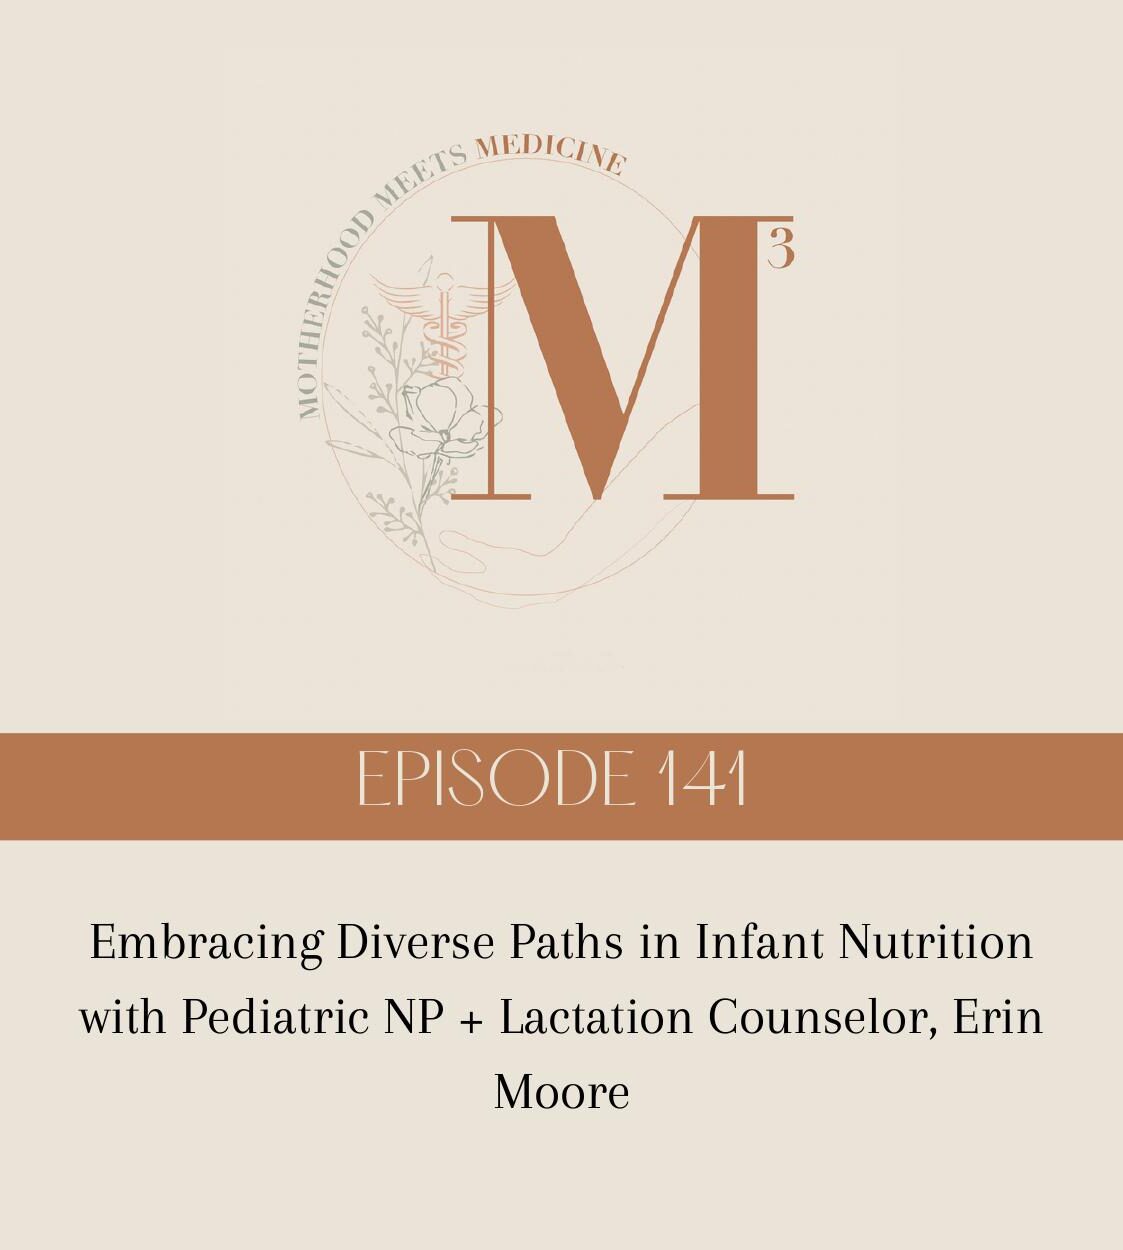 Episode 141: Embracing Diverse Paths in Infant Nutrition with Pediatric NP + Lactation Counselor, Erin Moore